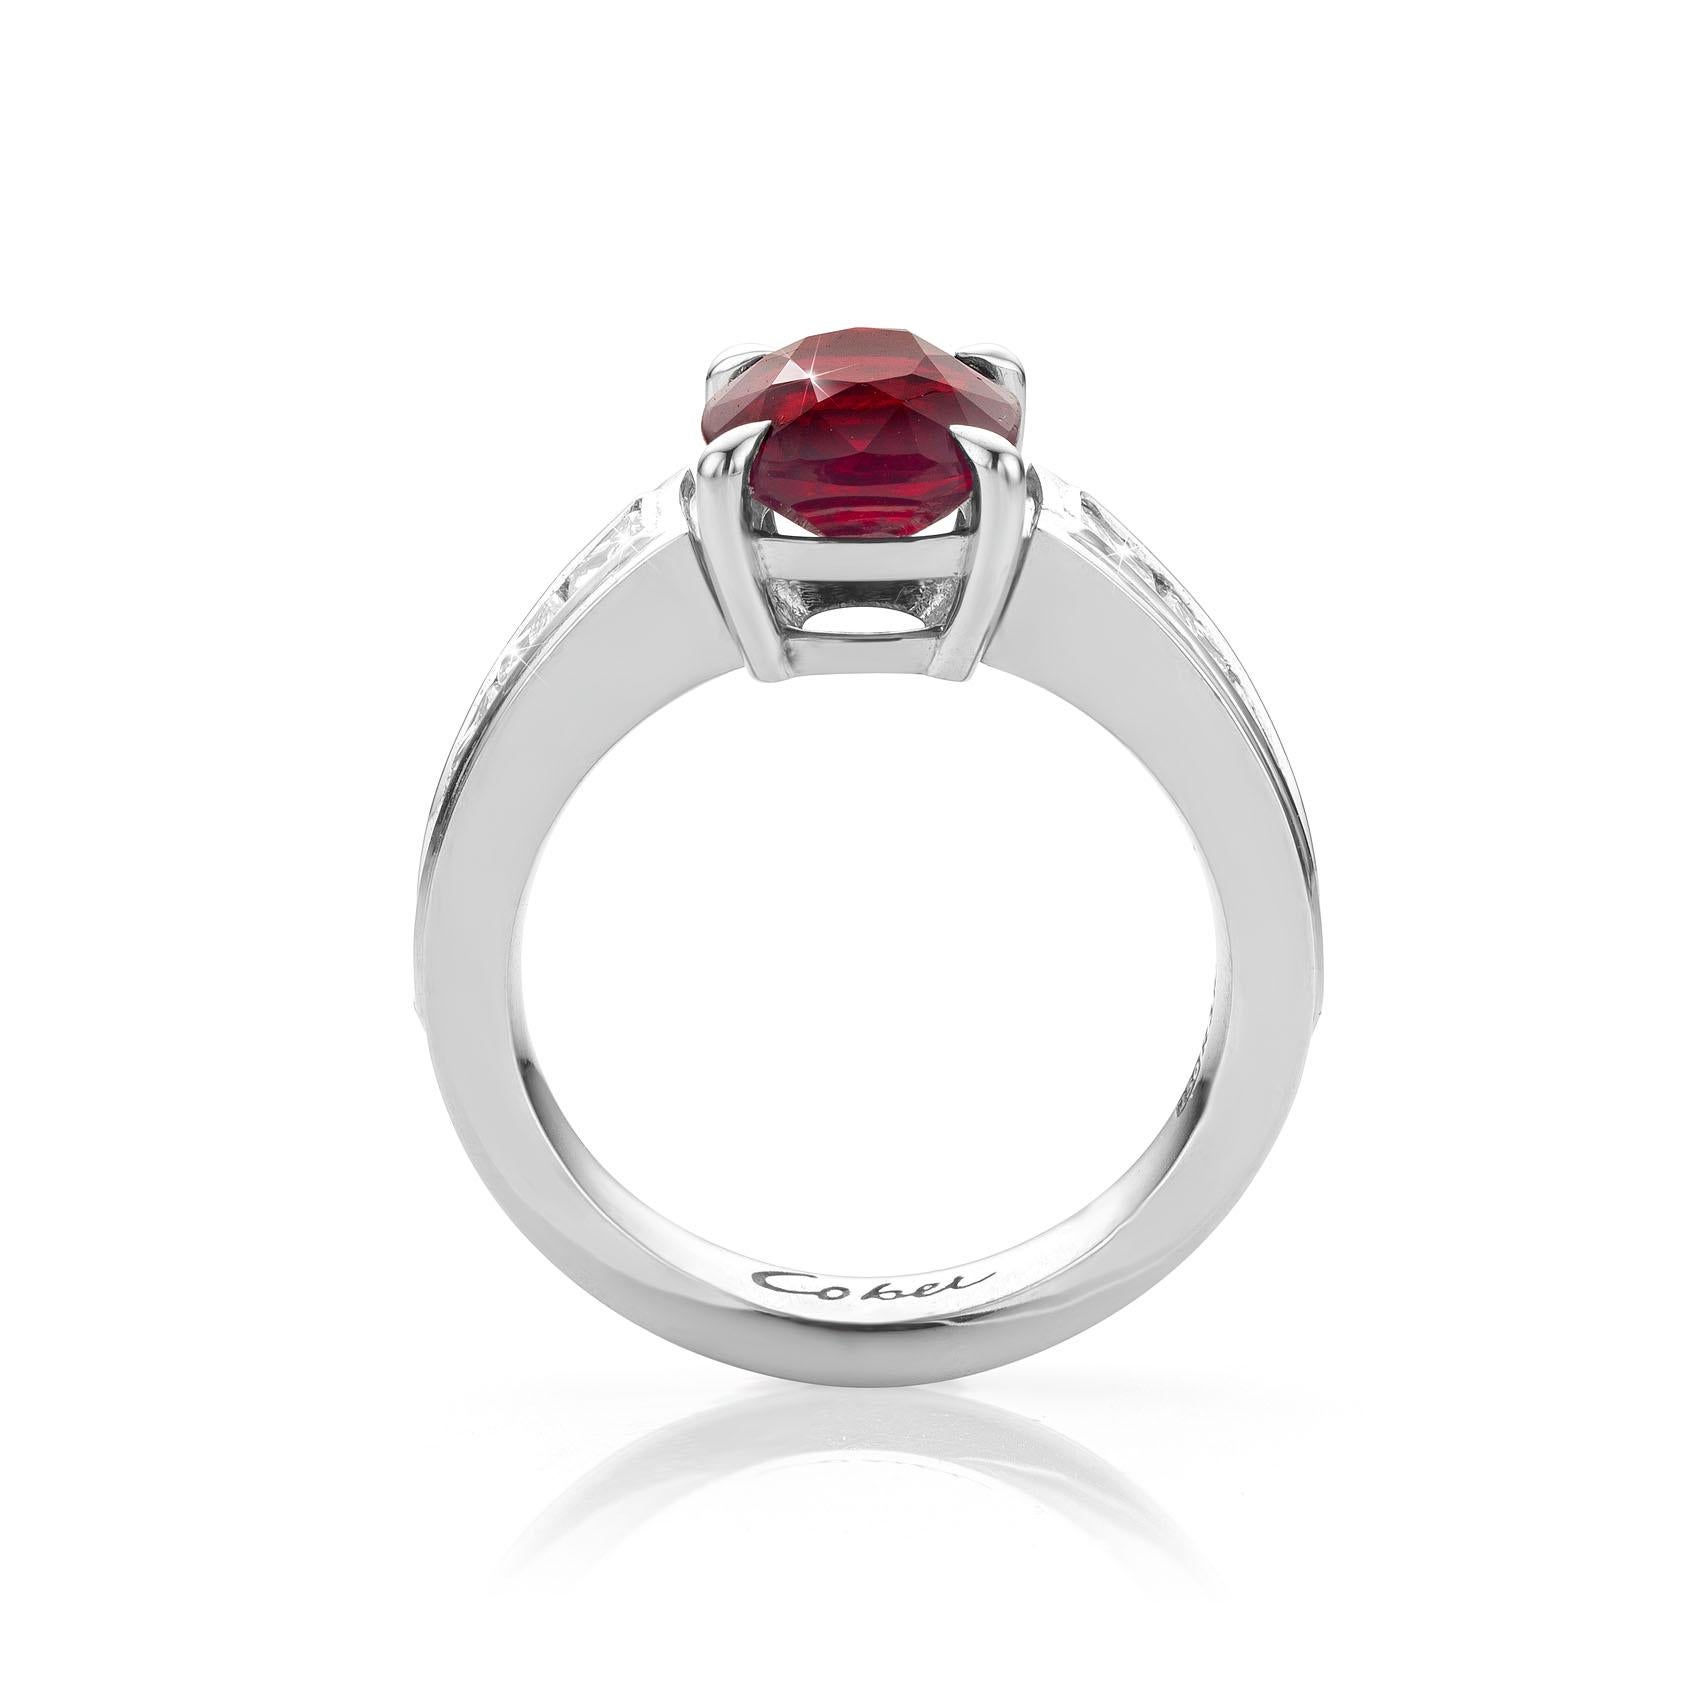 For Sale:  Cober Jewellery with 3.03 Carat Ruby  1.60 Carat total Diamonds White Gold Ring  4